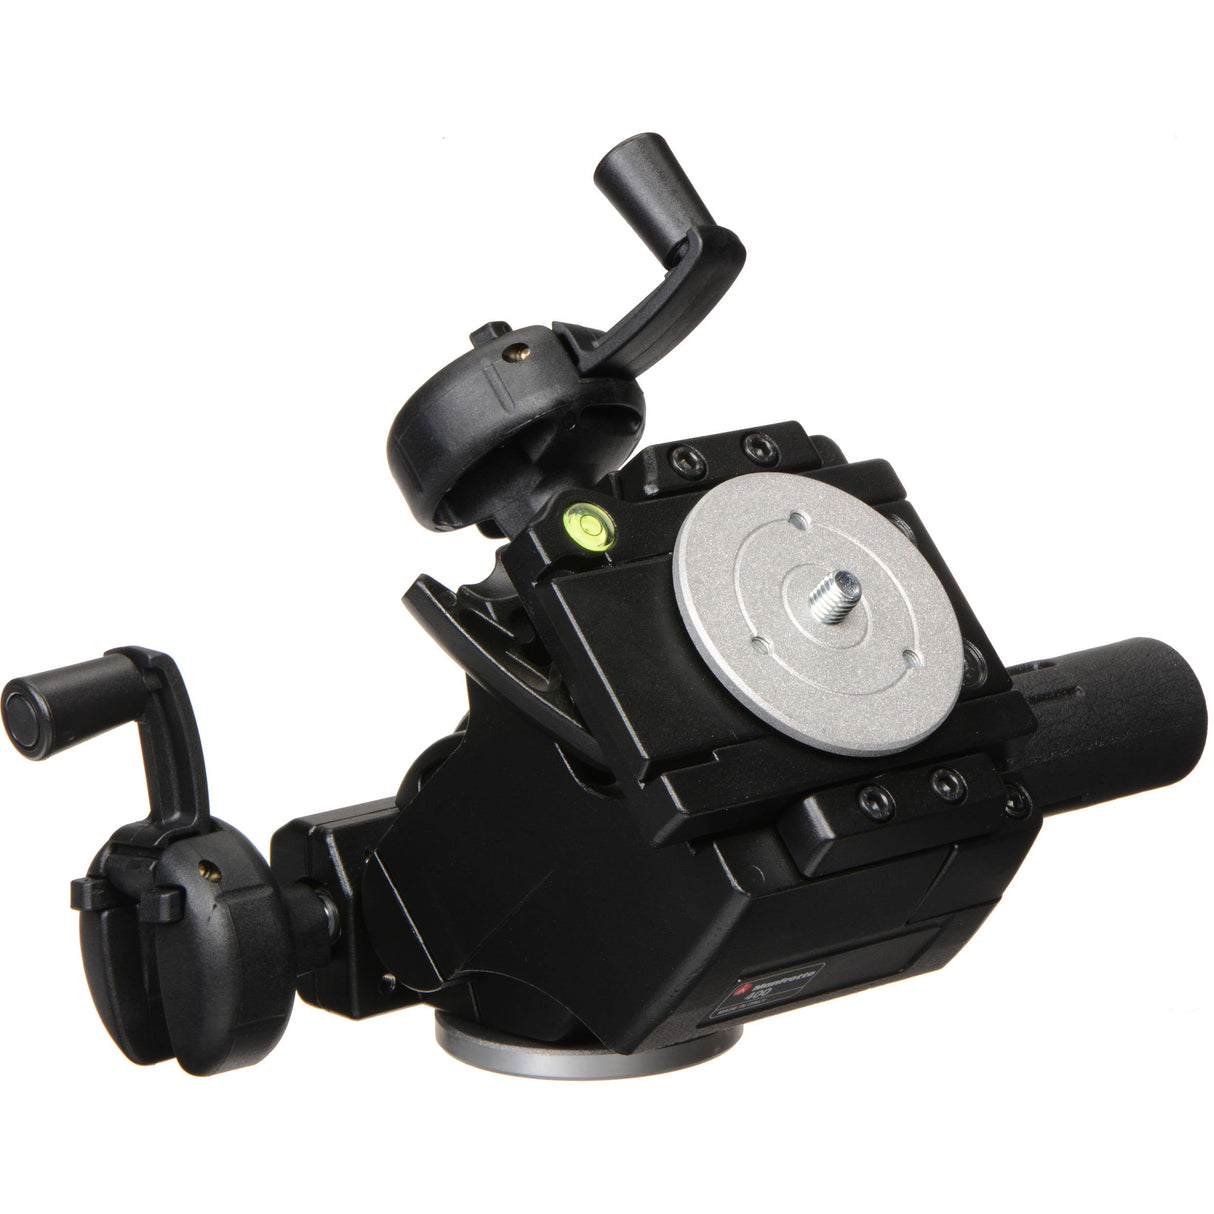 Manfrotto 400 3-Way Geared Pan-and-Tilt Head with Select Quick Release Plates